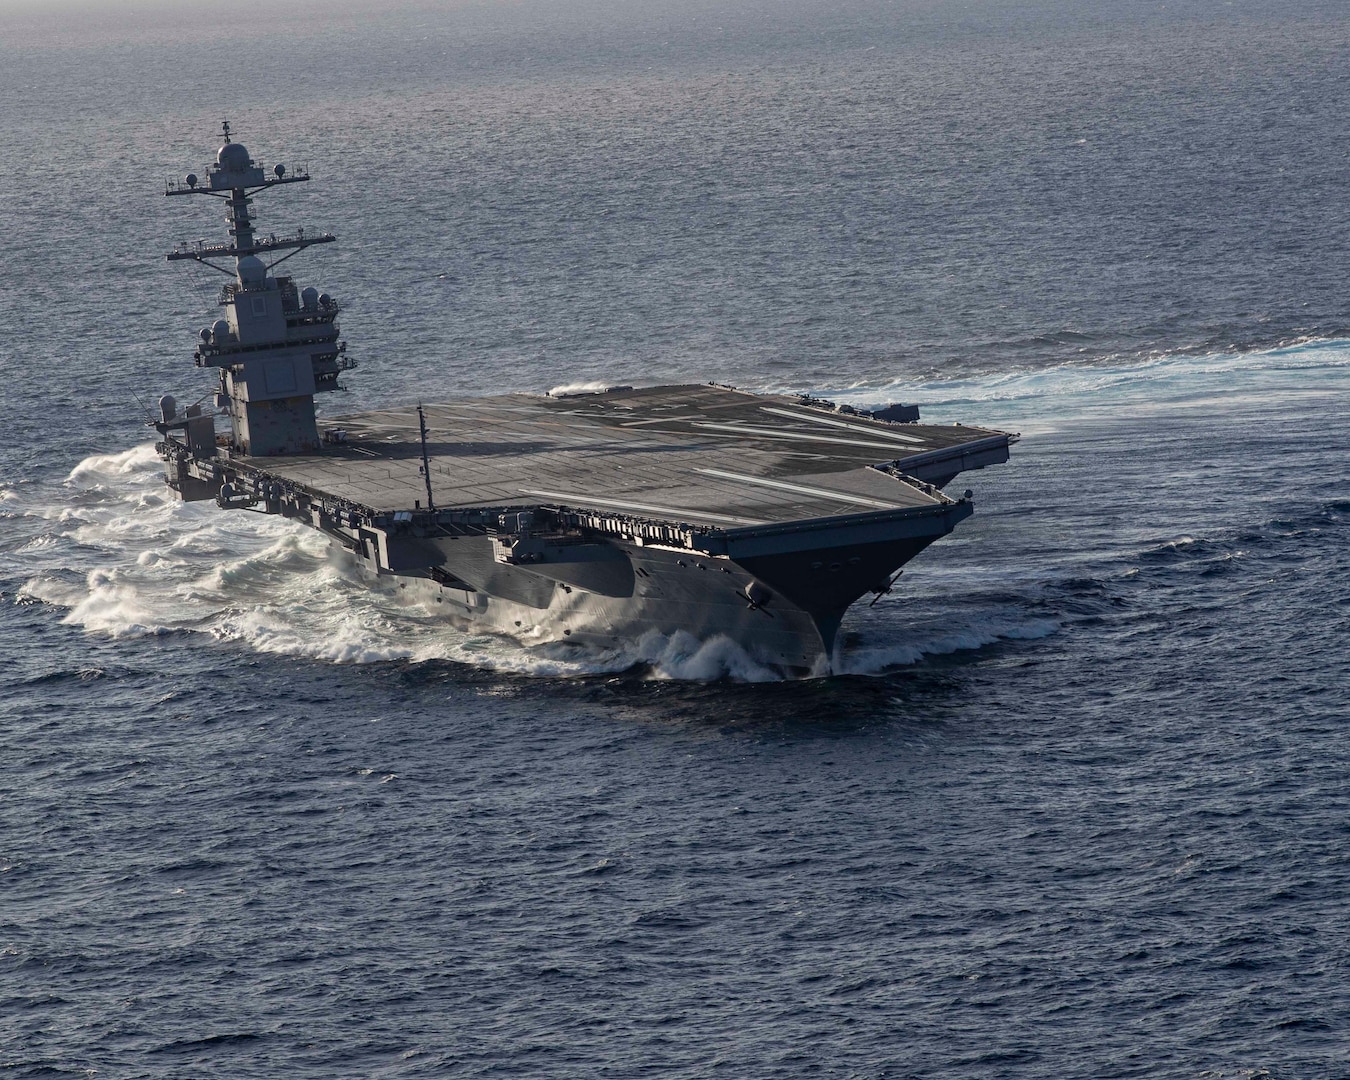 The aircraft carrier USS Gerald R. Ford (CVN 78) conducts high-speed turns in the Atlantic Ocean, Oct. 29, 2019.